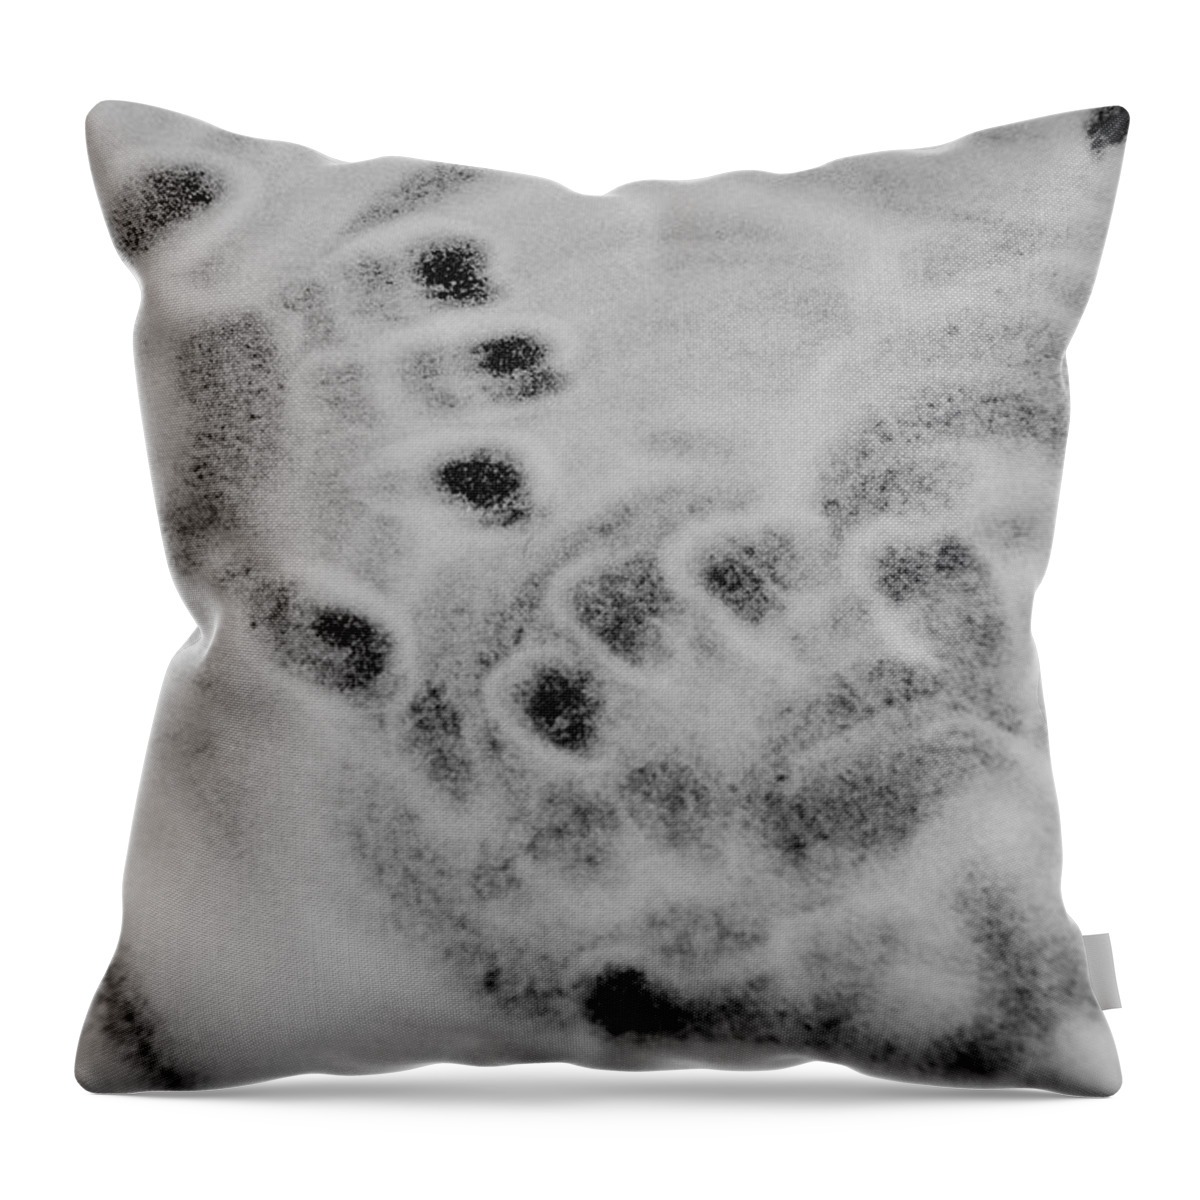 Black And White Throw Pillow featuring the photograph Child Hand Prints by Rob Hans